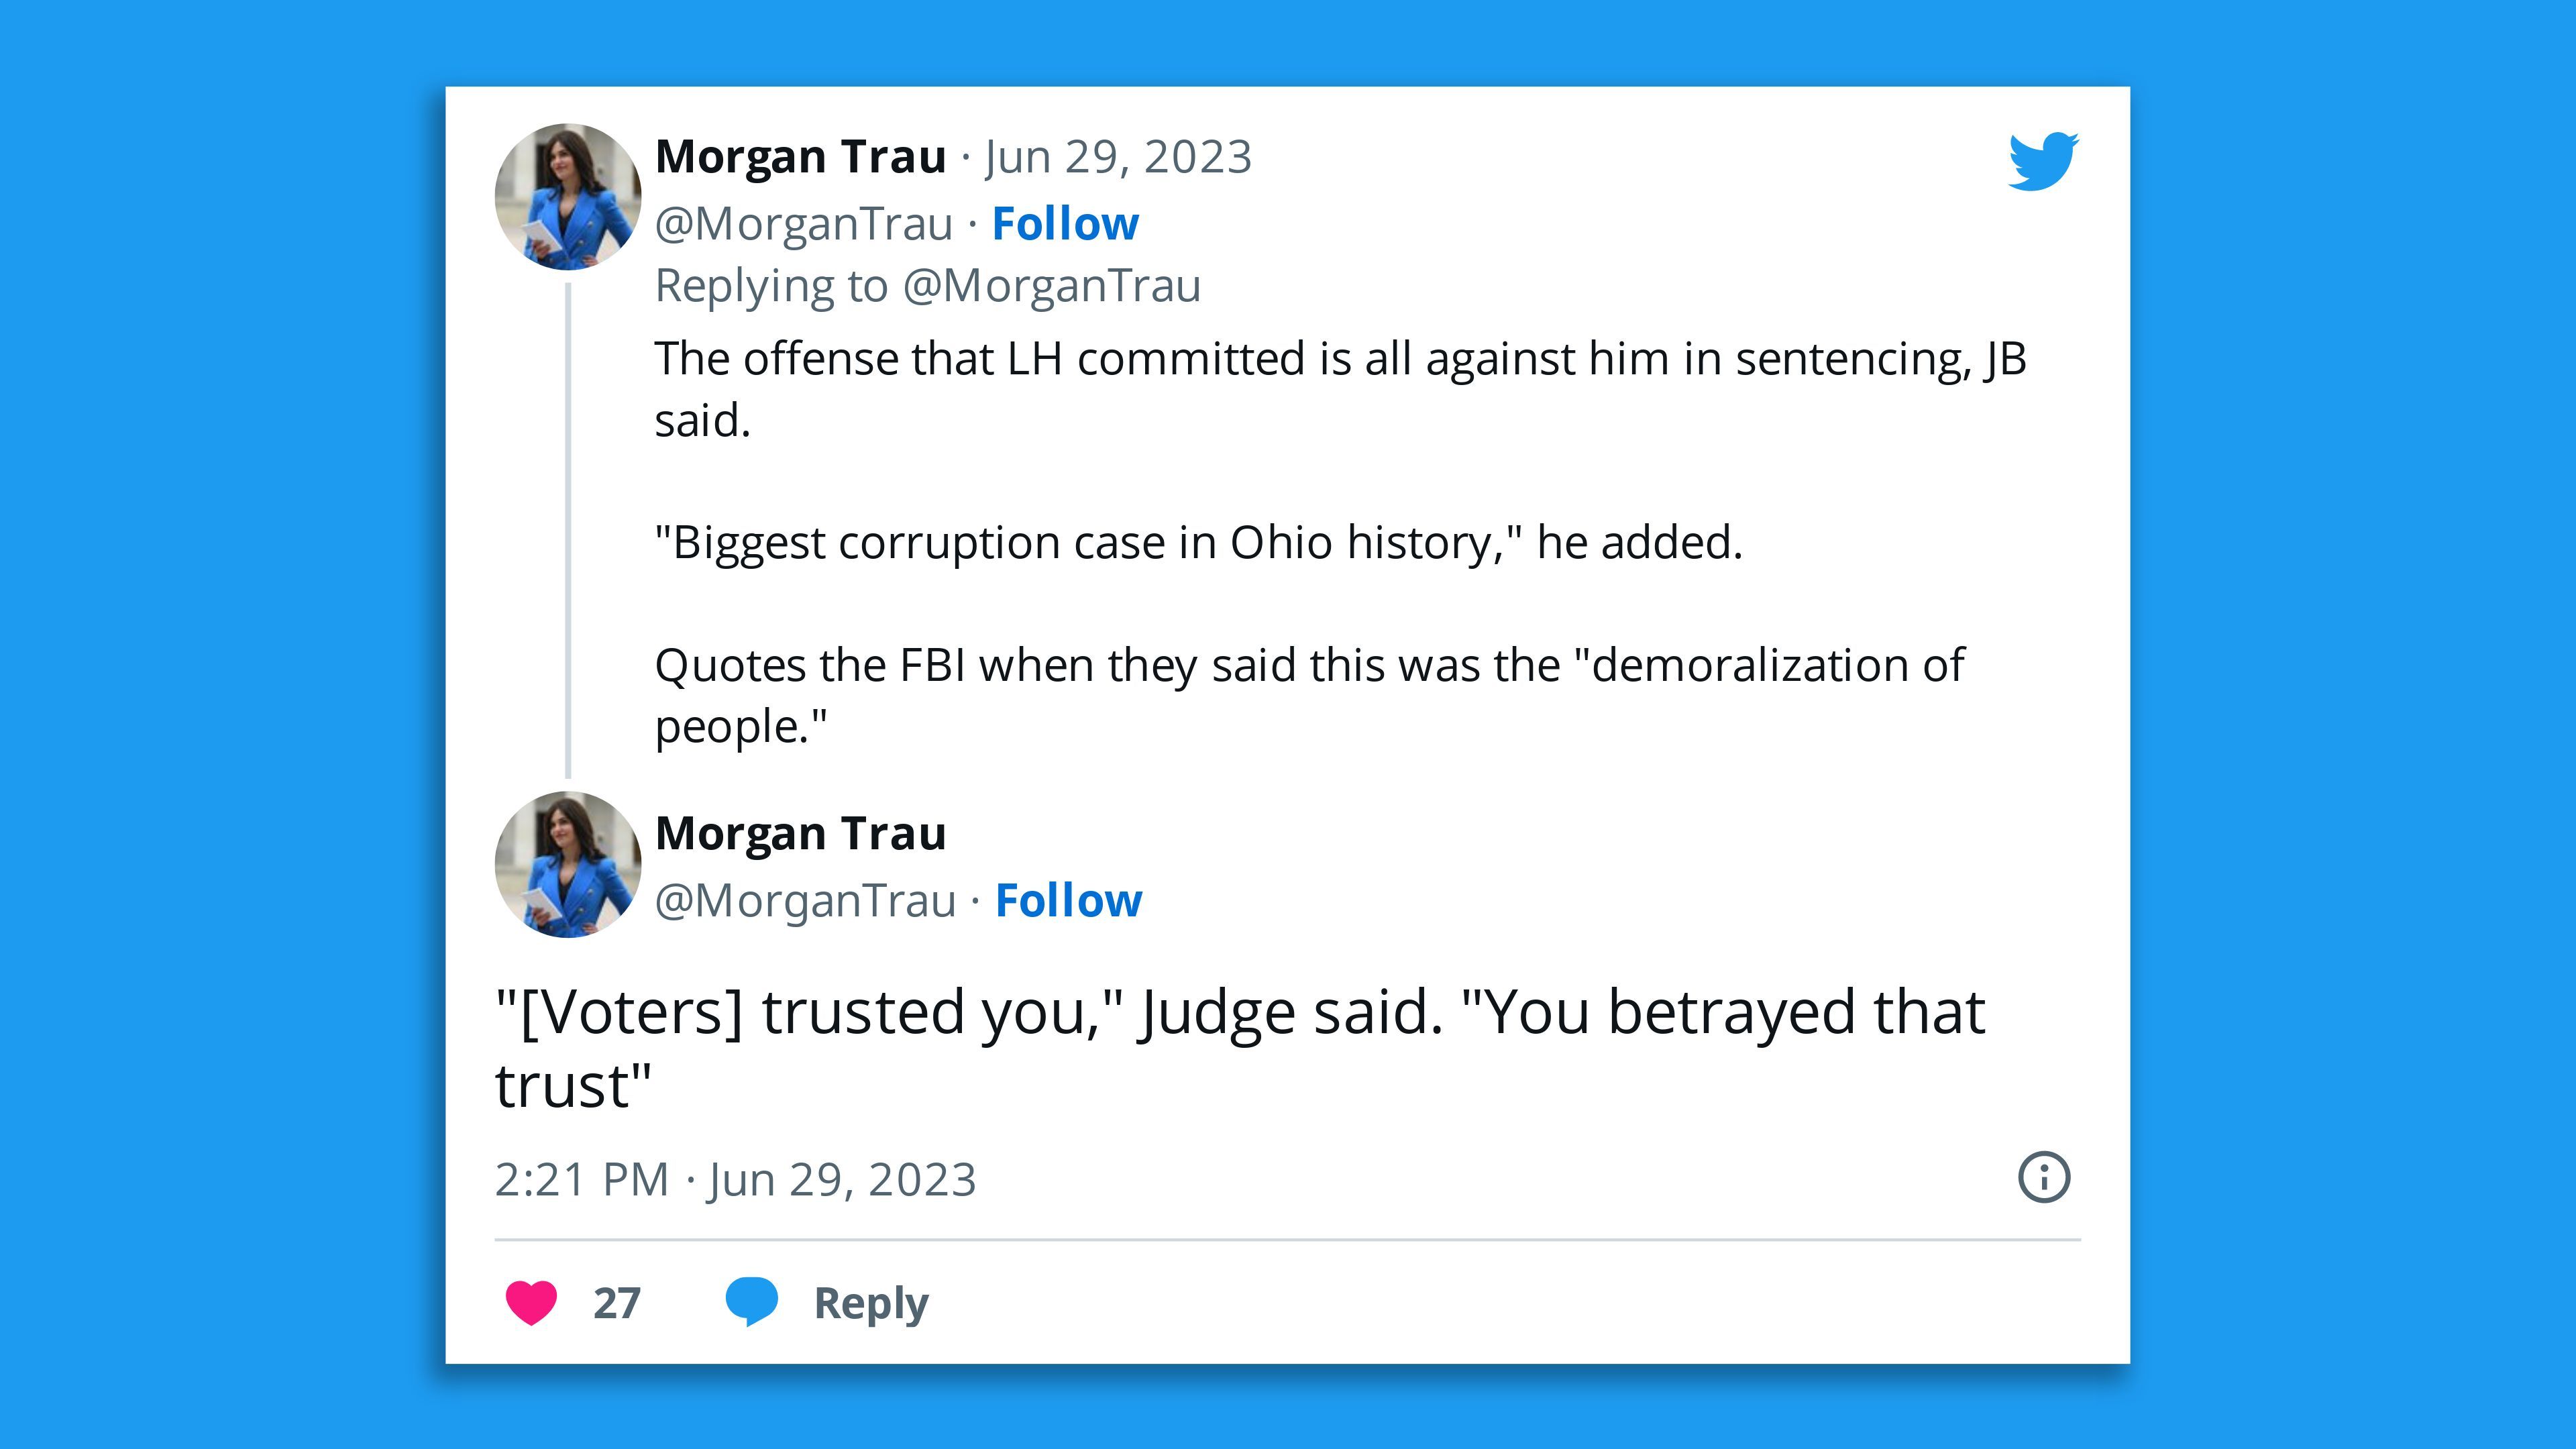 Tweets from Morgan Trau quoting a judge during the Larry Householder sentencing hearing.